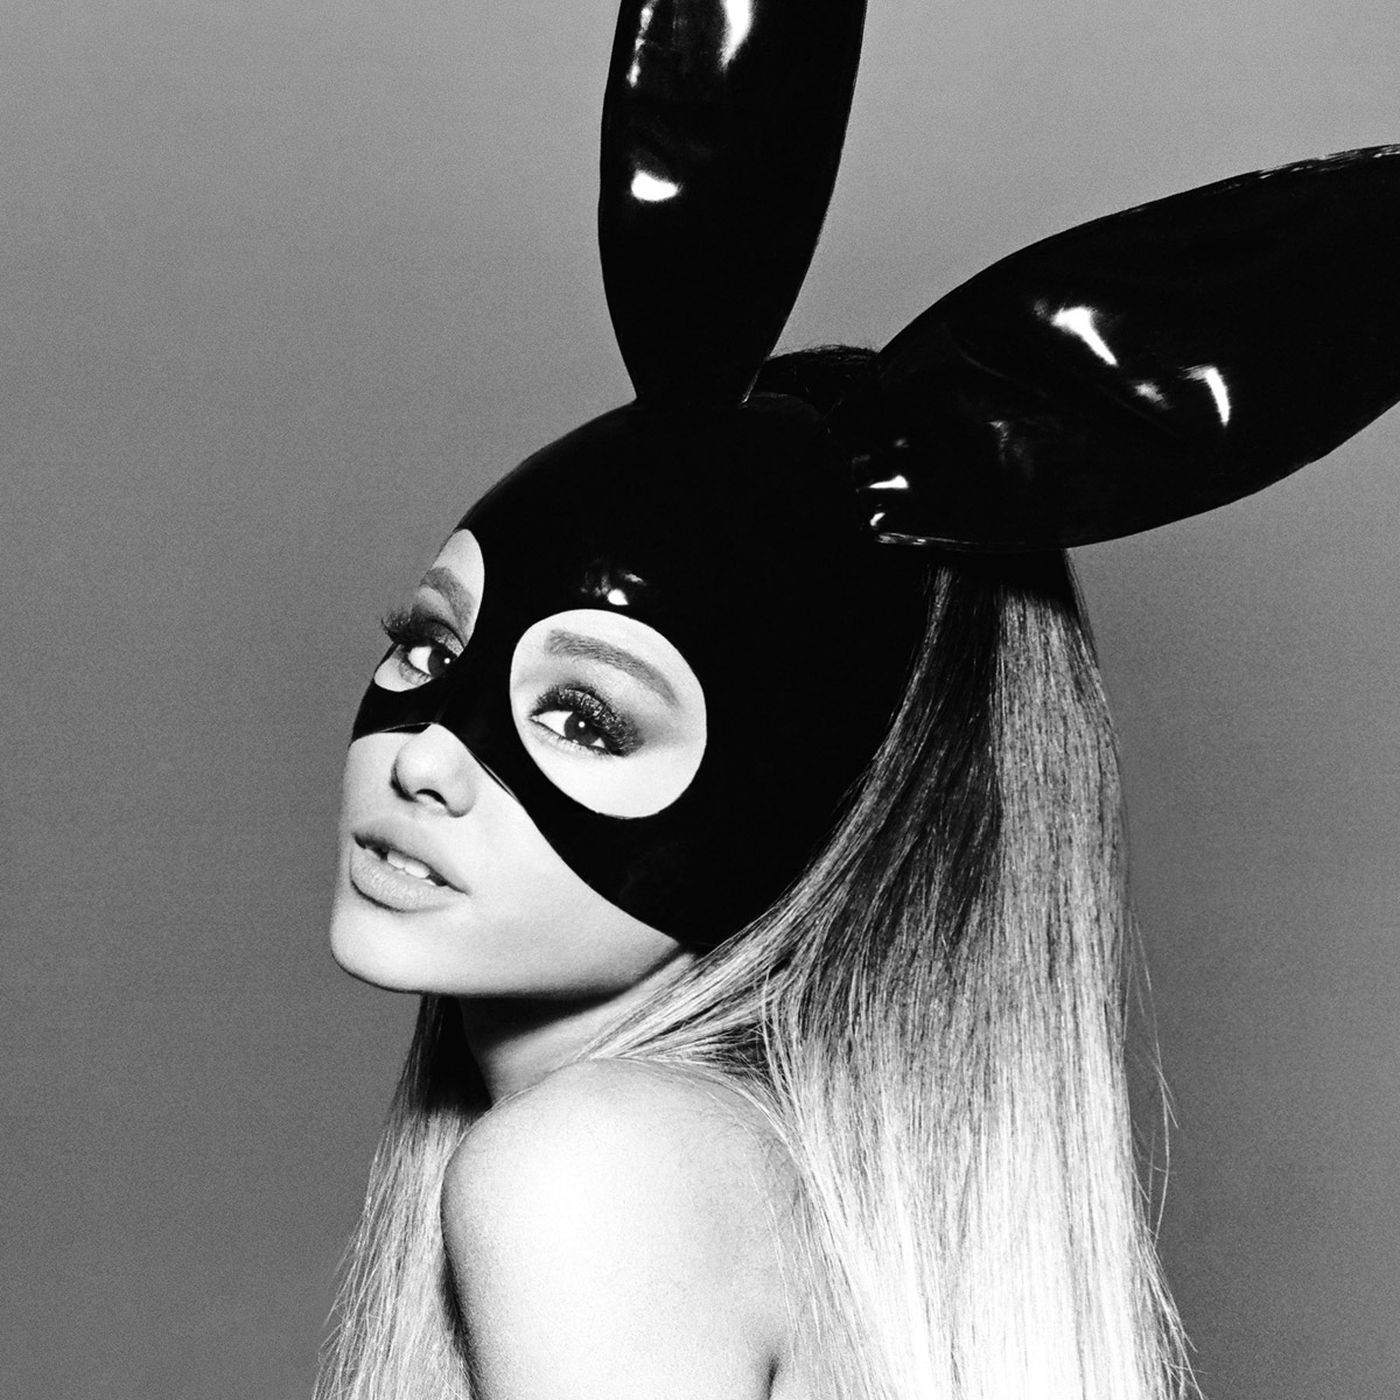 Ariana Grande to be guest character in Final Fantasy mobile game